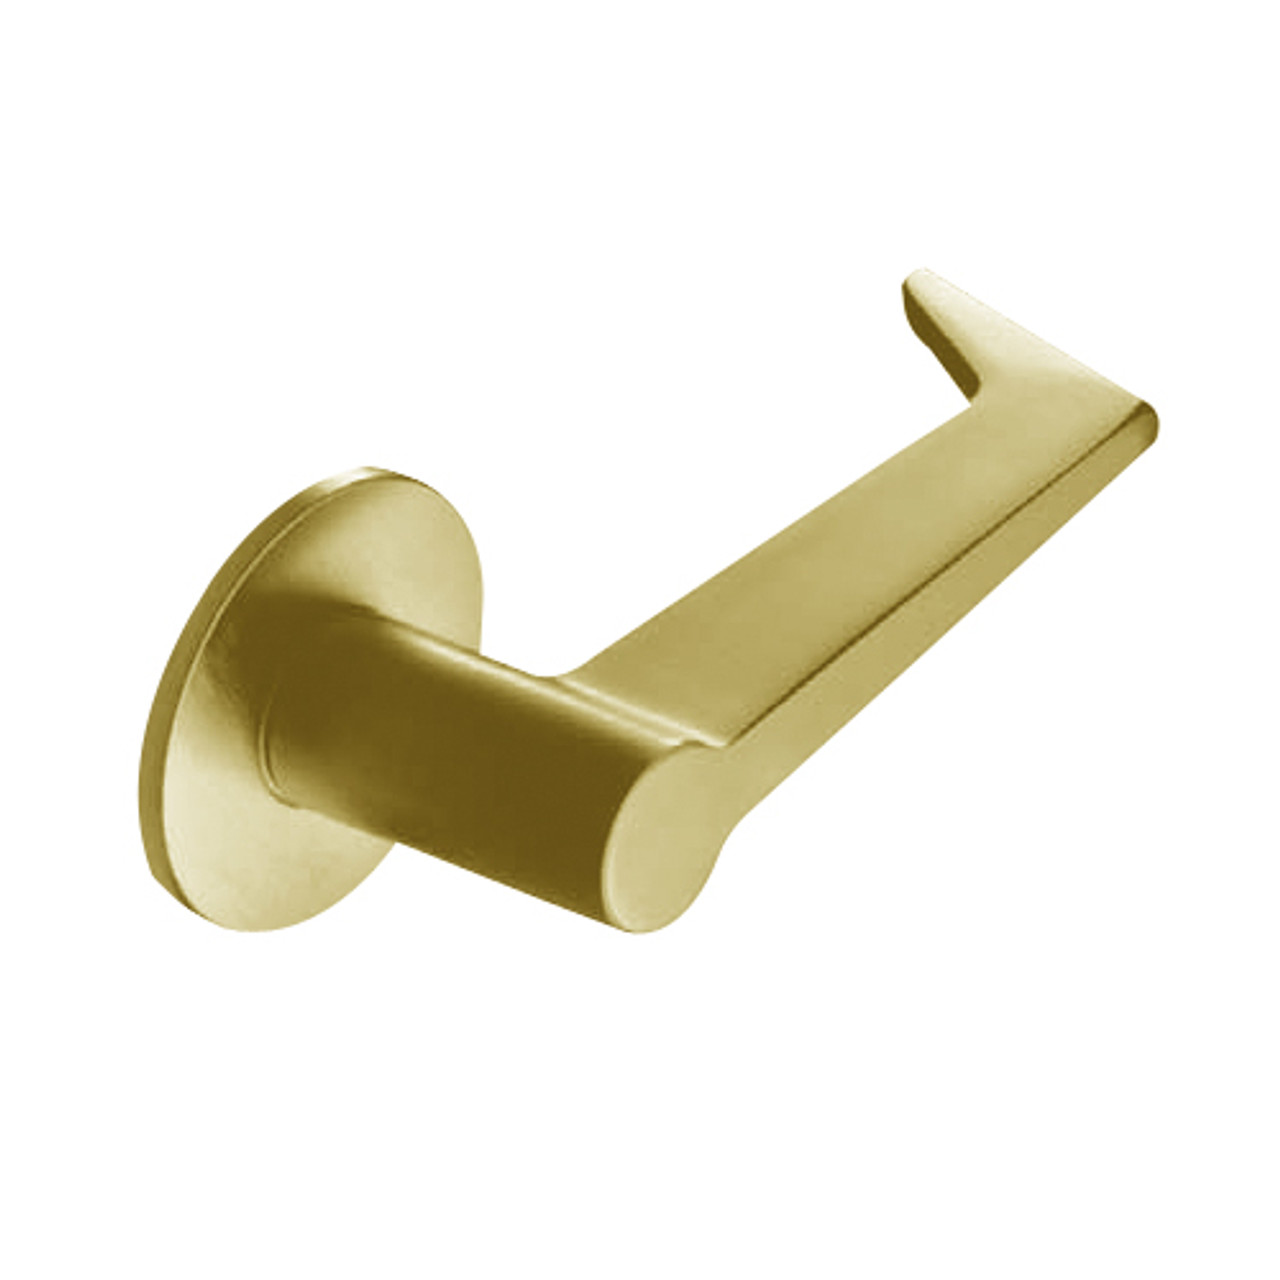 ML2053-ESF-606-CL7 Corbin Russwin ML2000 Series IC 7-Pin Less Core Mortise Entrance Locksets with Essex Lever in Satin Brass